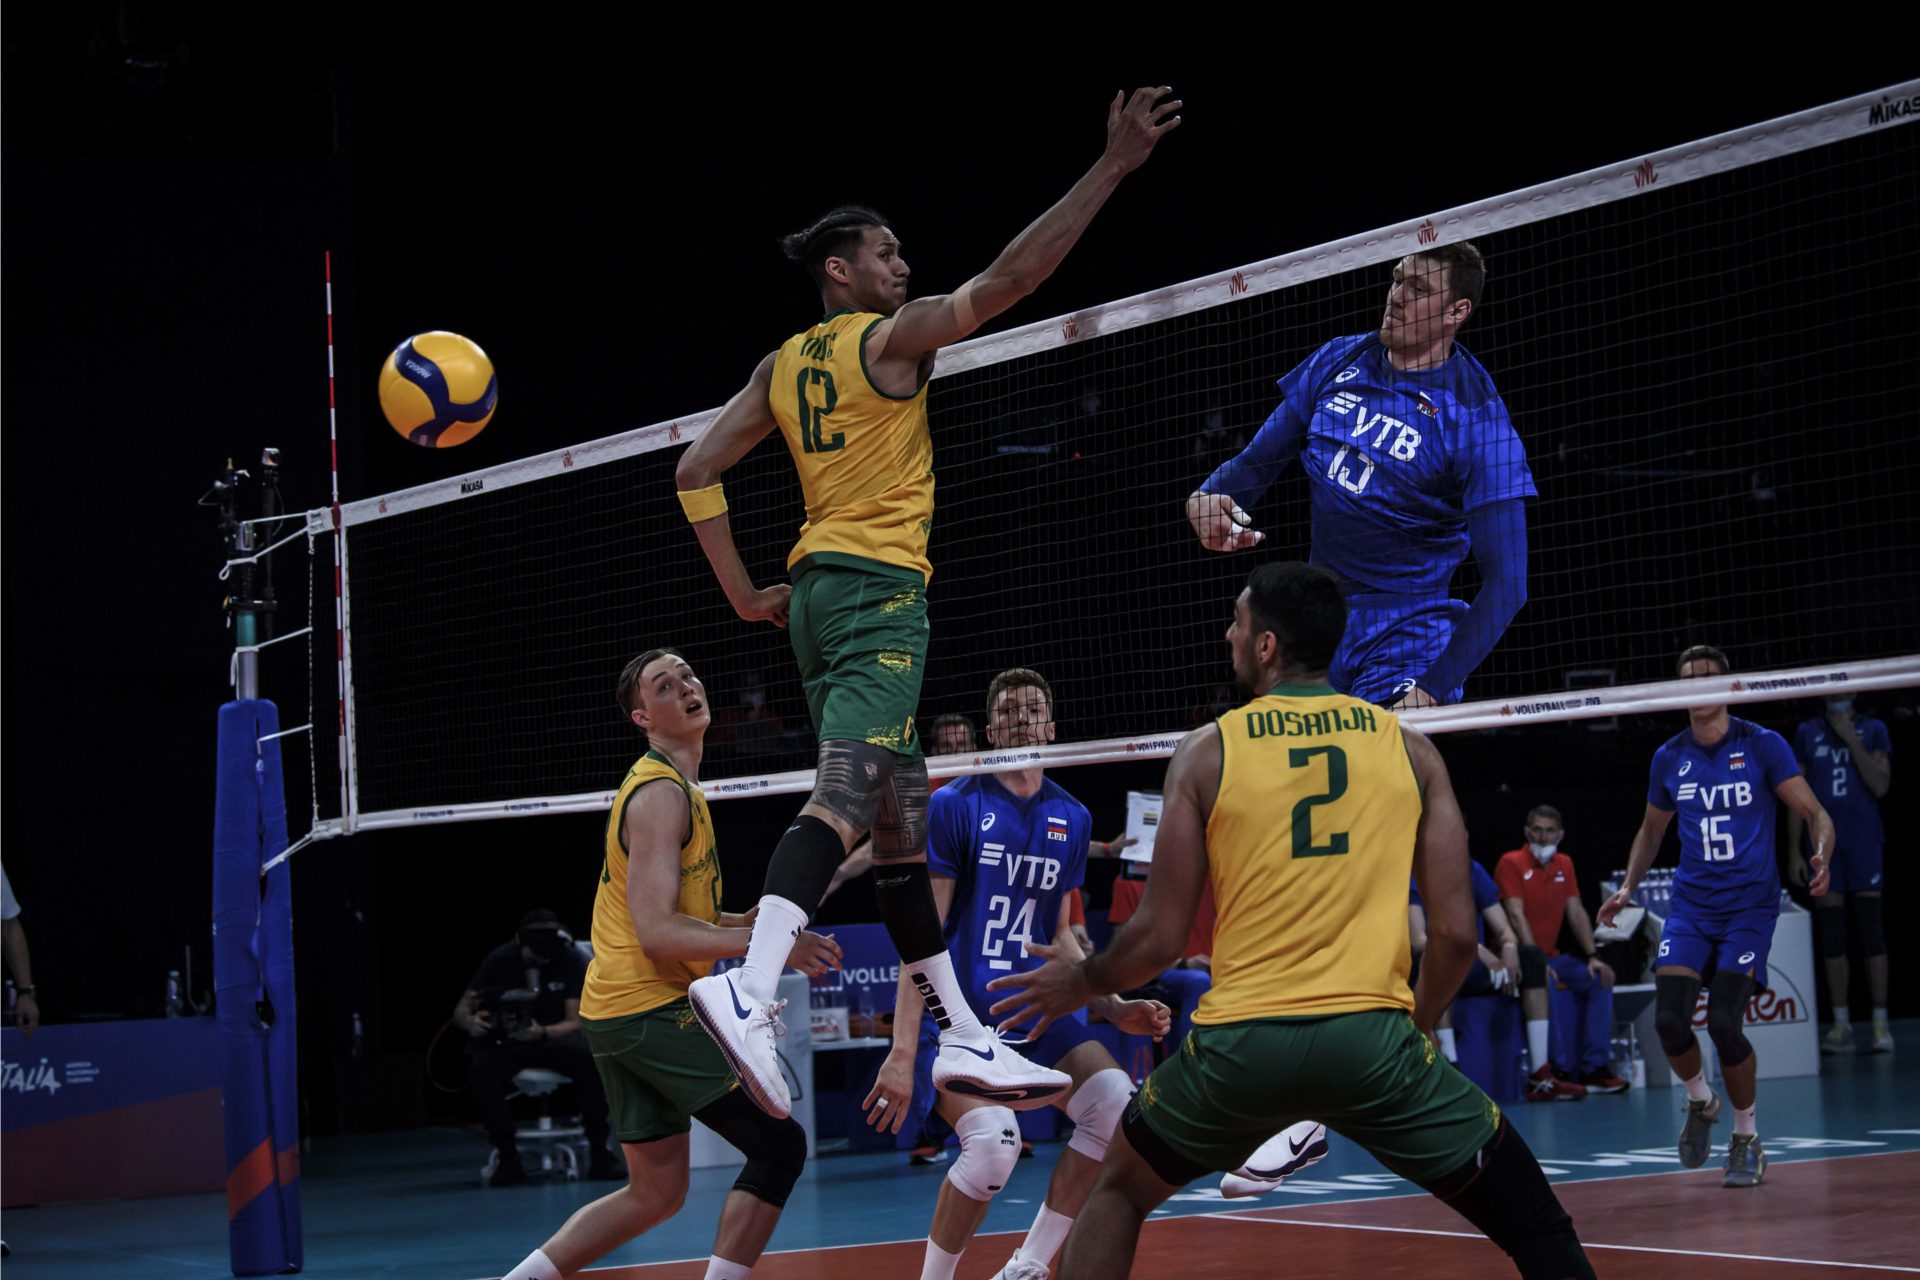 VOLLEYROOS GO DOWN IN HARD-FOUGHT STRAIGHT SETS AGAINST REIGNING CHAMPS ...